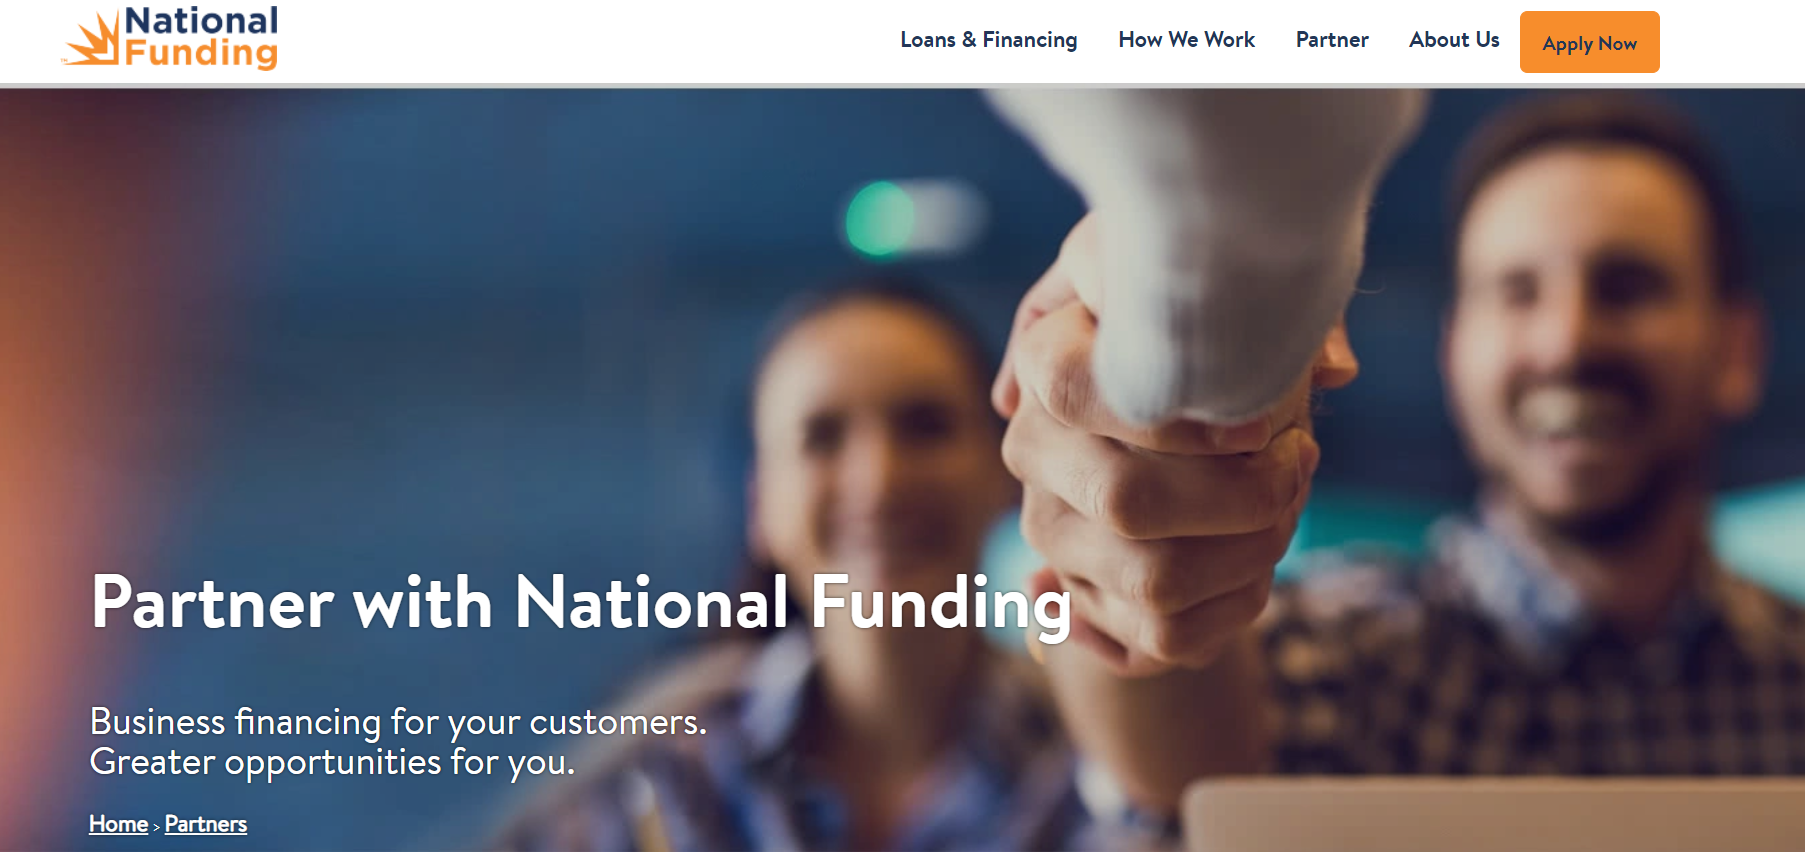 National Funding Overview